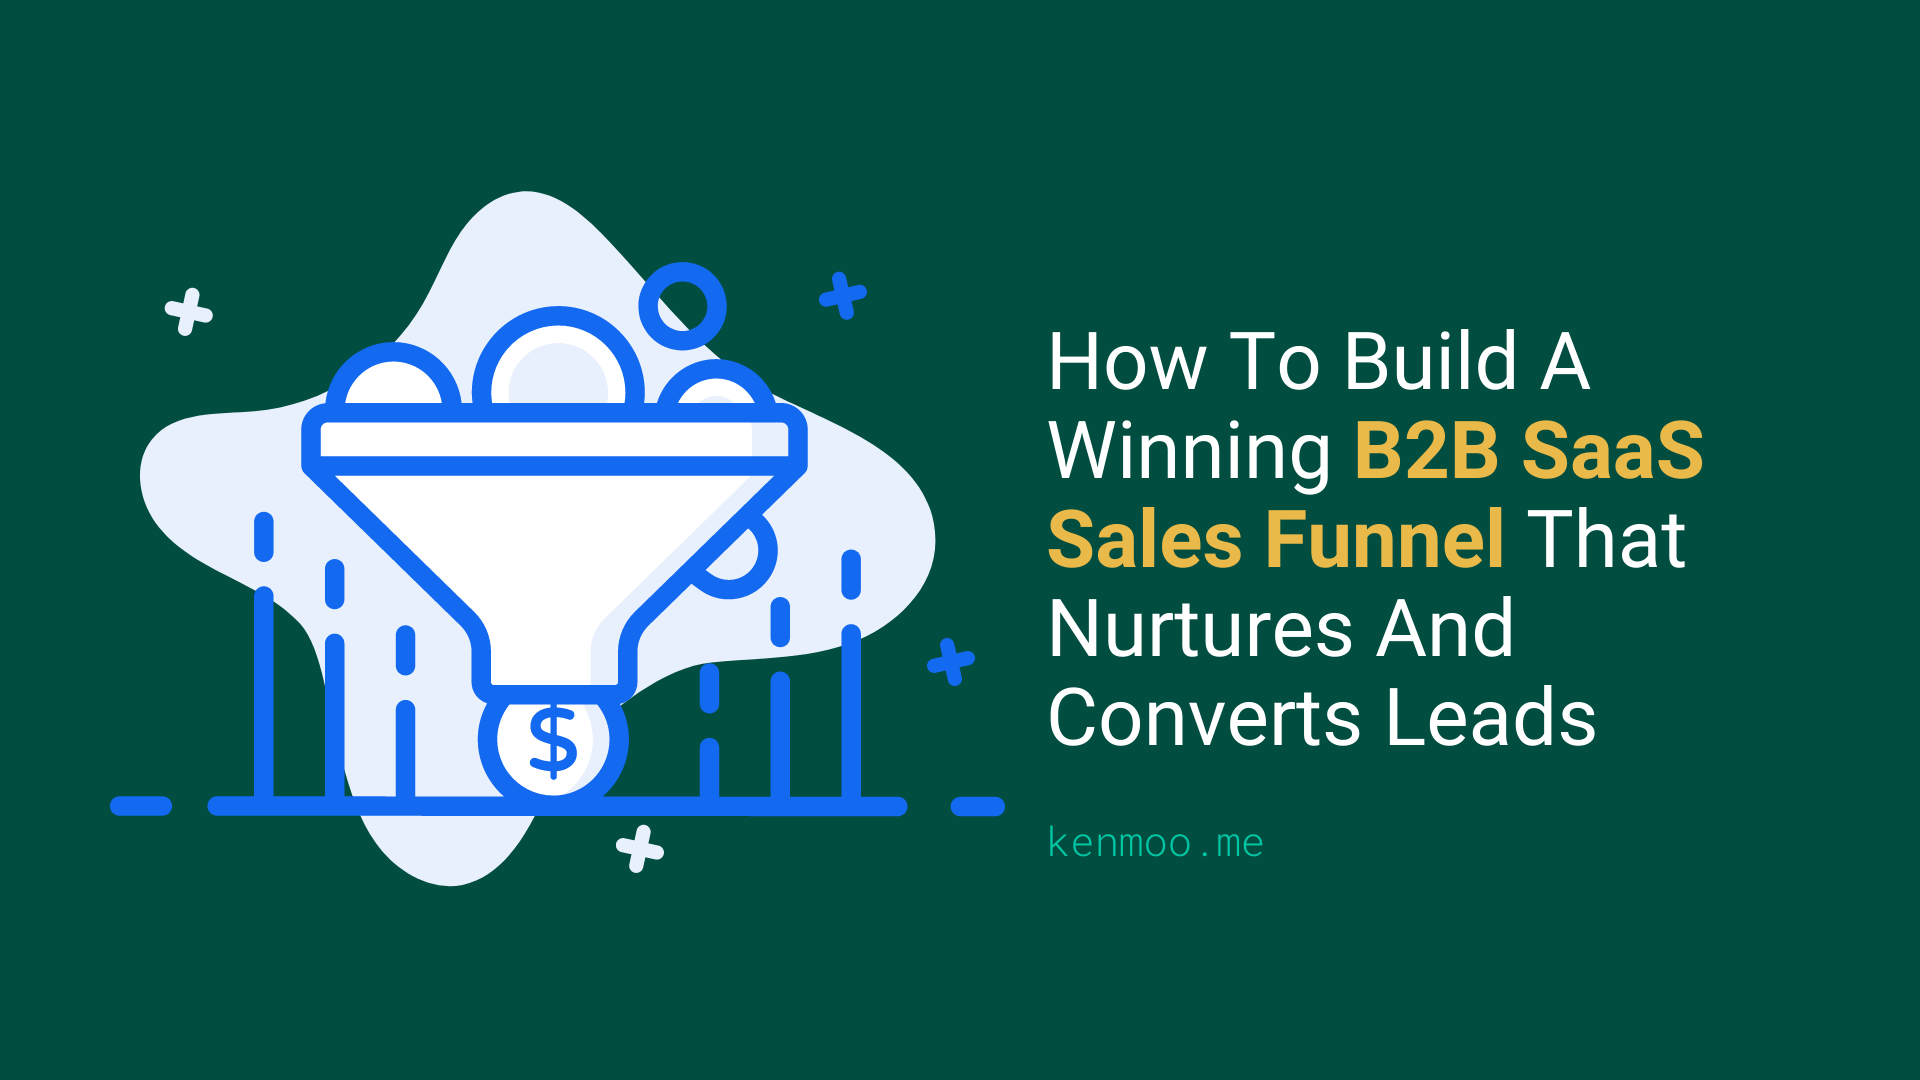 How To Build A Winning B2B SaaS Sales Funnel